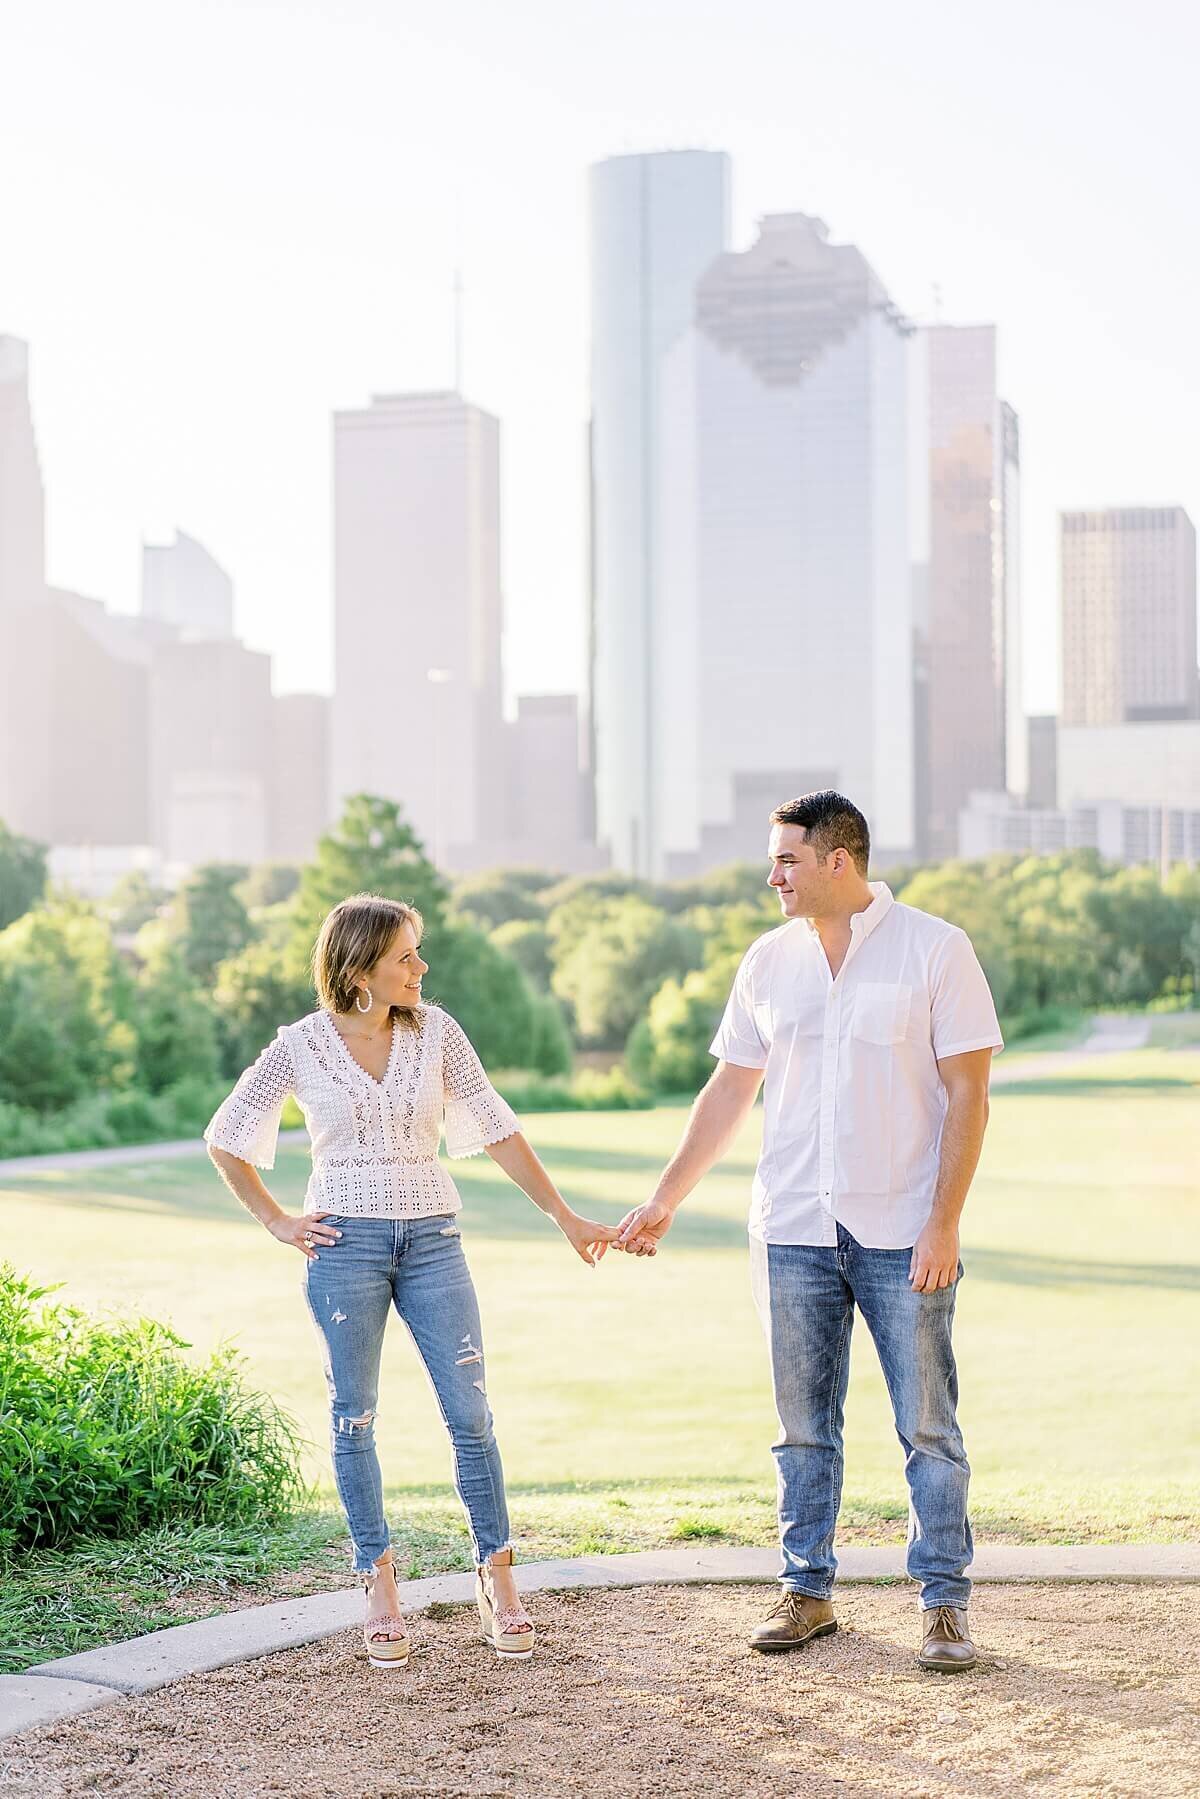 McGovern-Centennial-Gardens-Hermann-Park-Engagement-Session-Alicia-Yarrish-Photography_0016